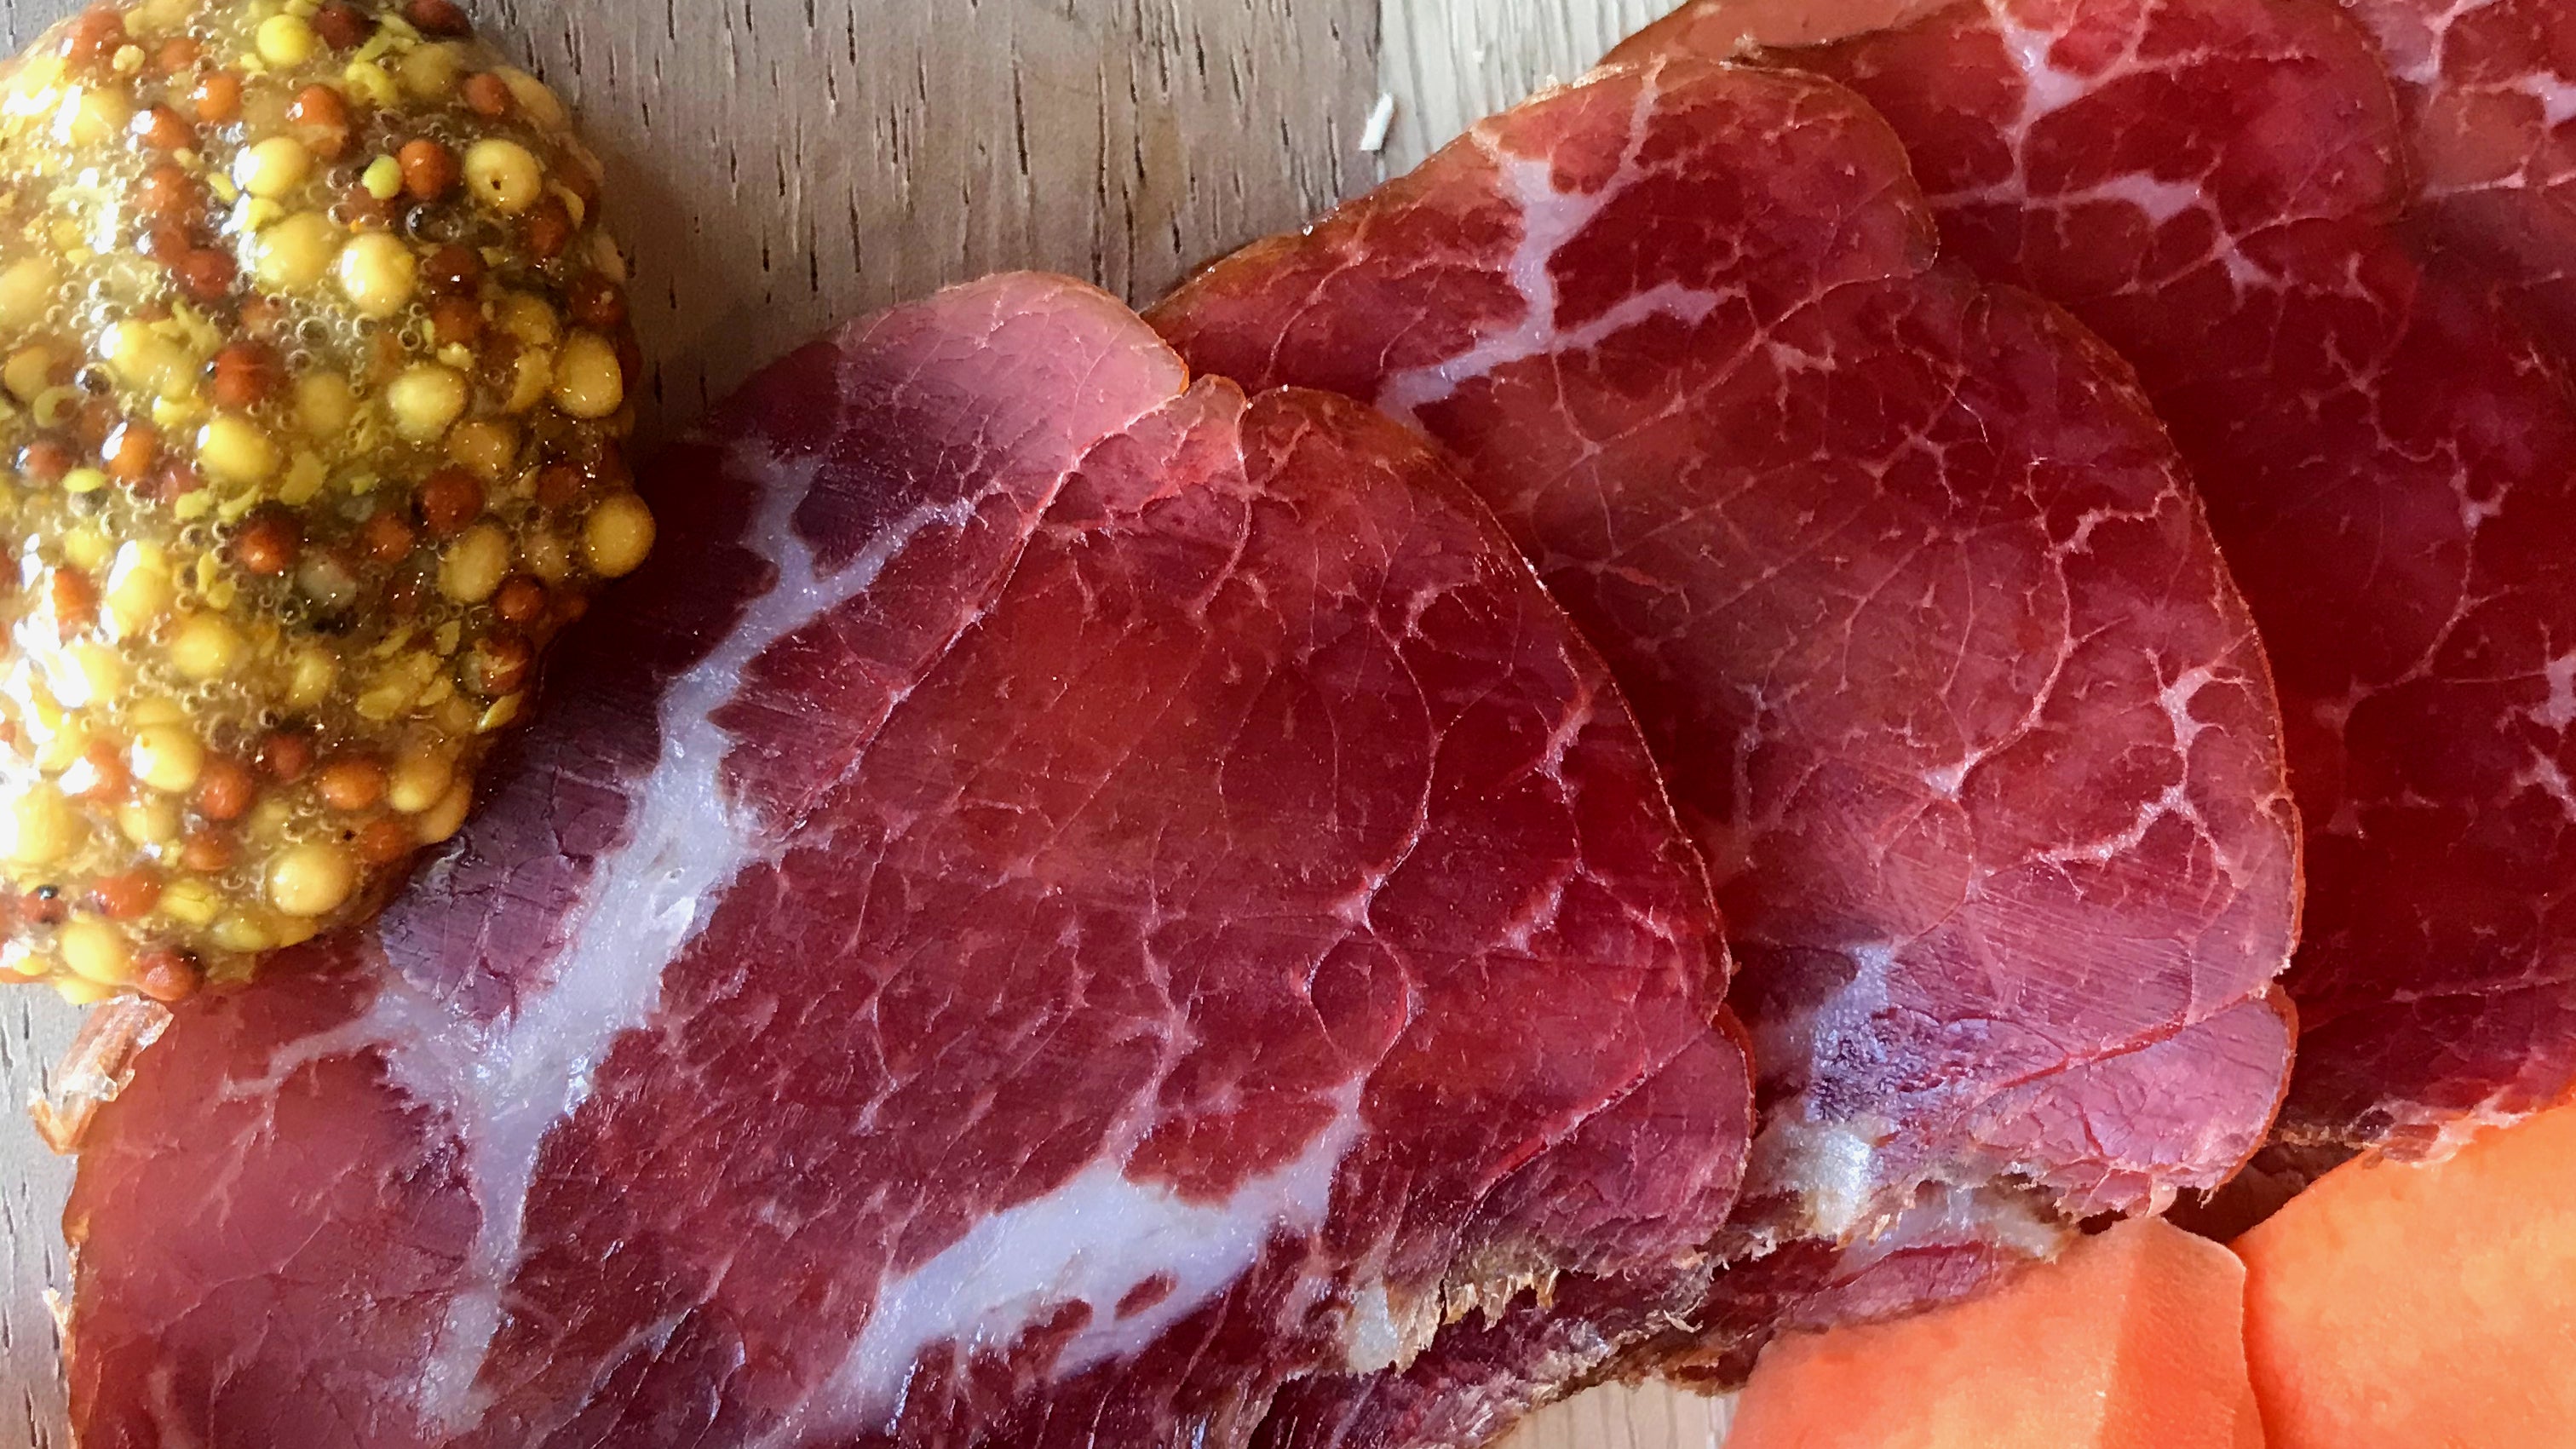 A picture of waygu beef bresaola shot up close and above. The bresaola is cut into slices and displayed on a charcuterie board next to mustard and carrots.